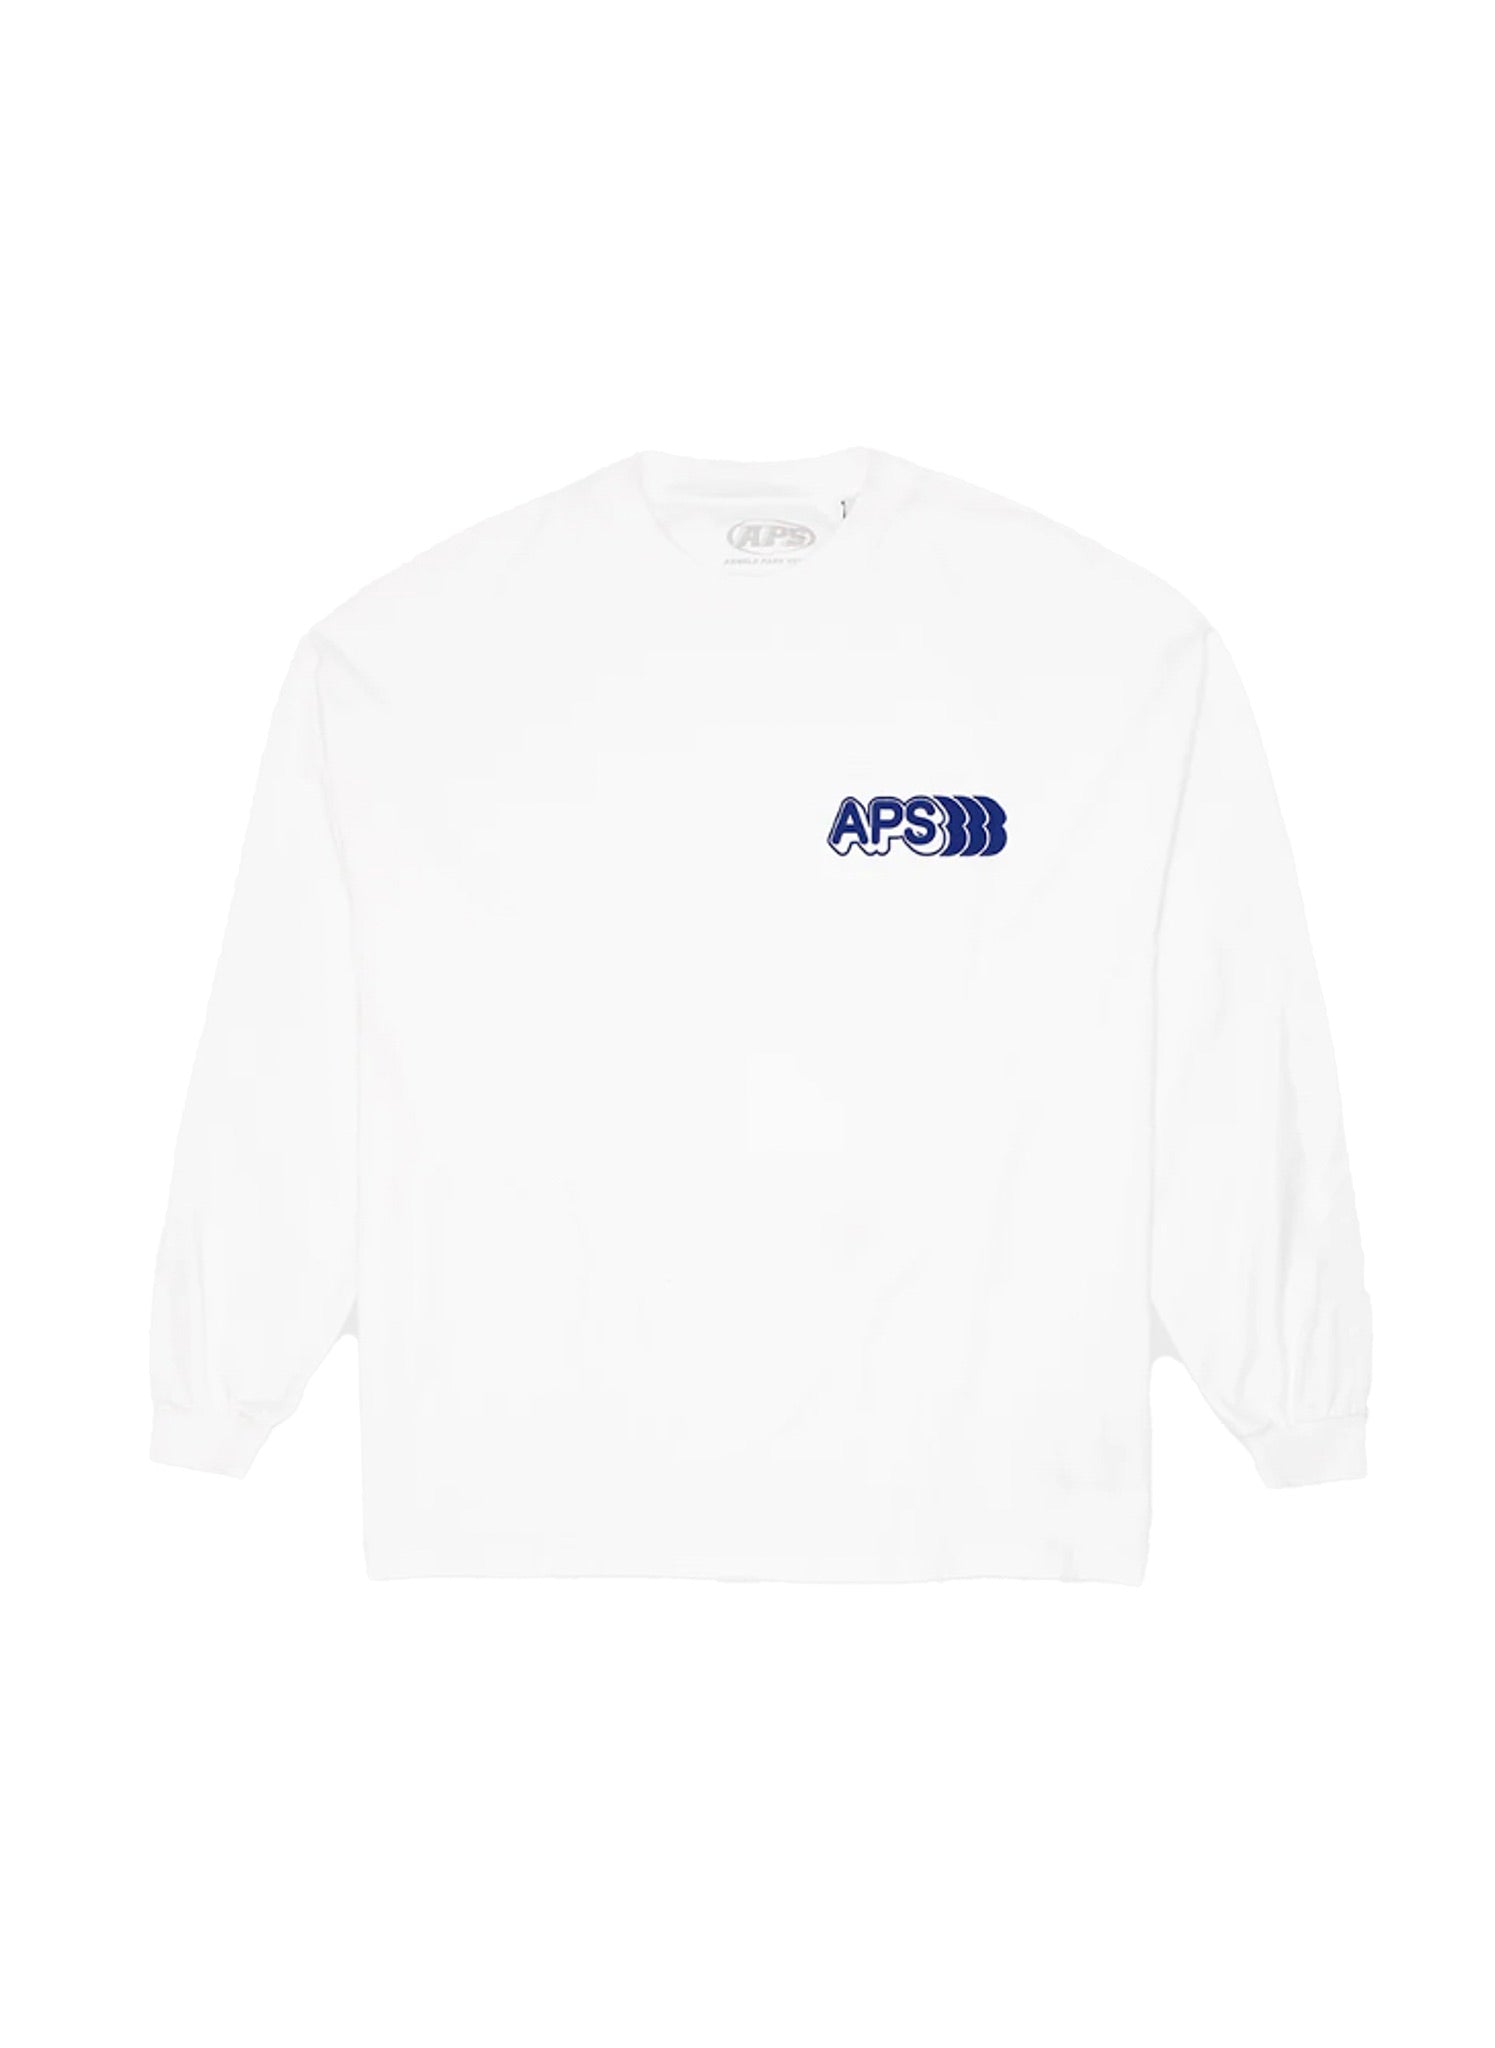 <span style="color: #f50b0b;">Last One</span> ARNOLD PARK STUDIOS / SPRING LS T WHITE